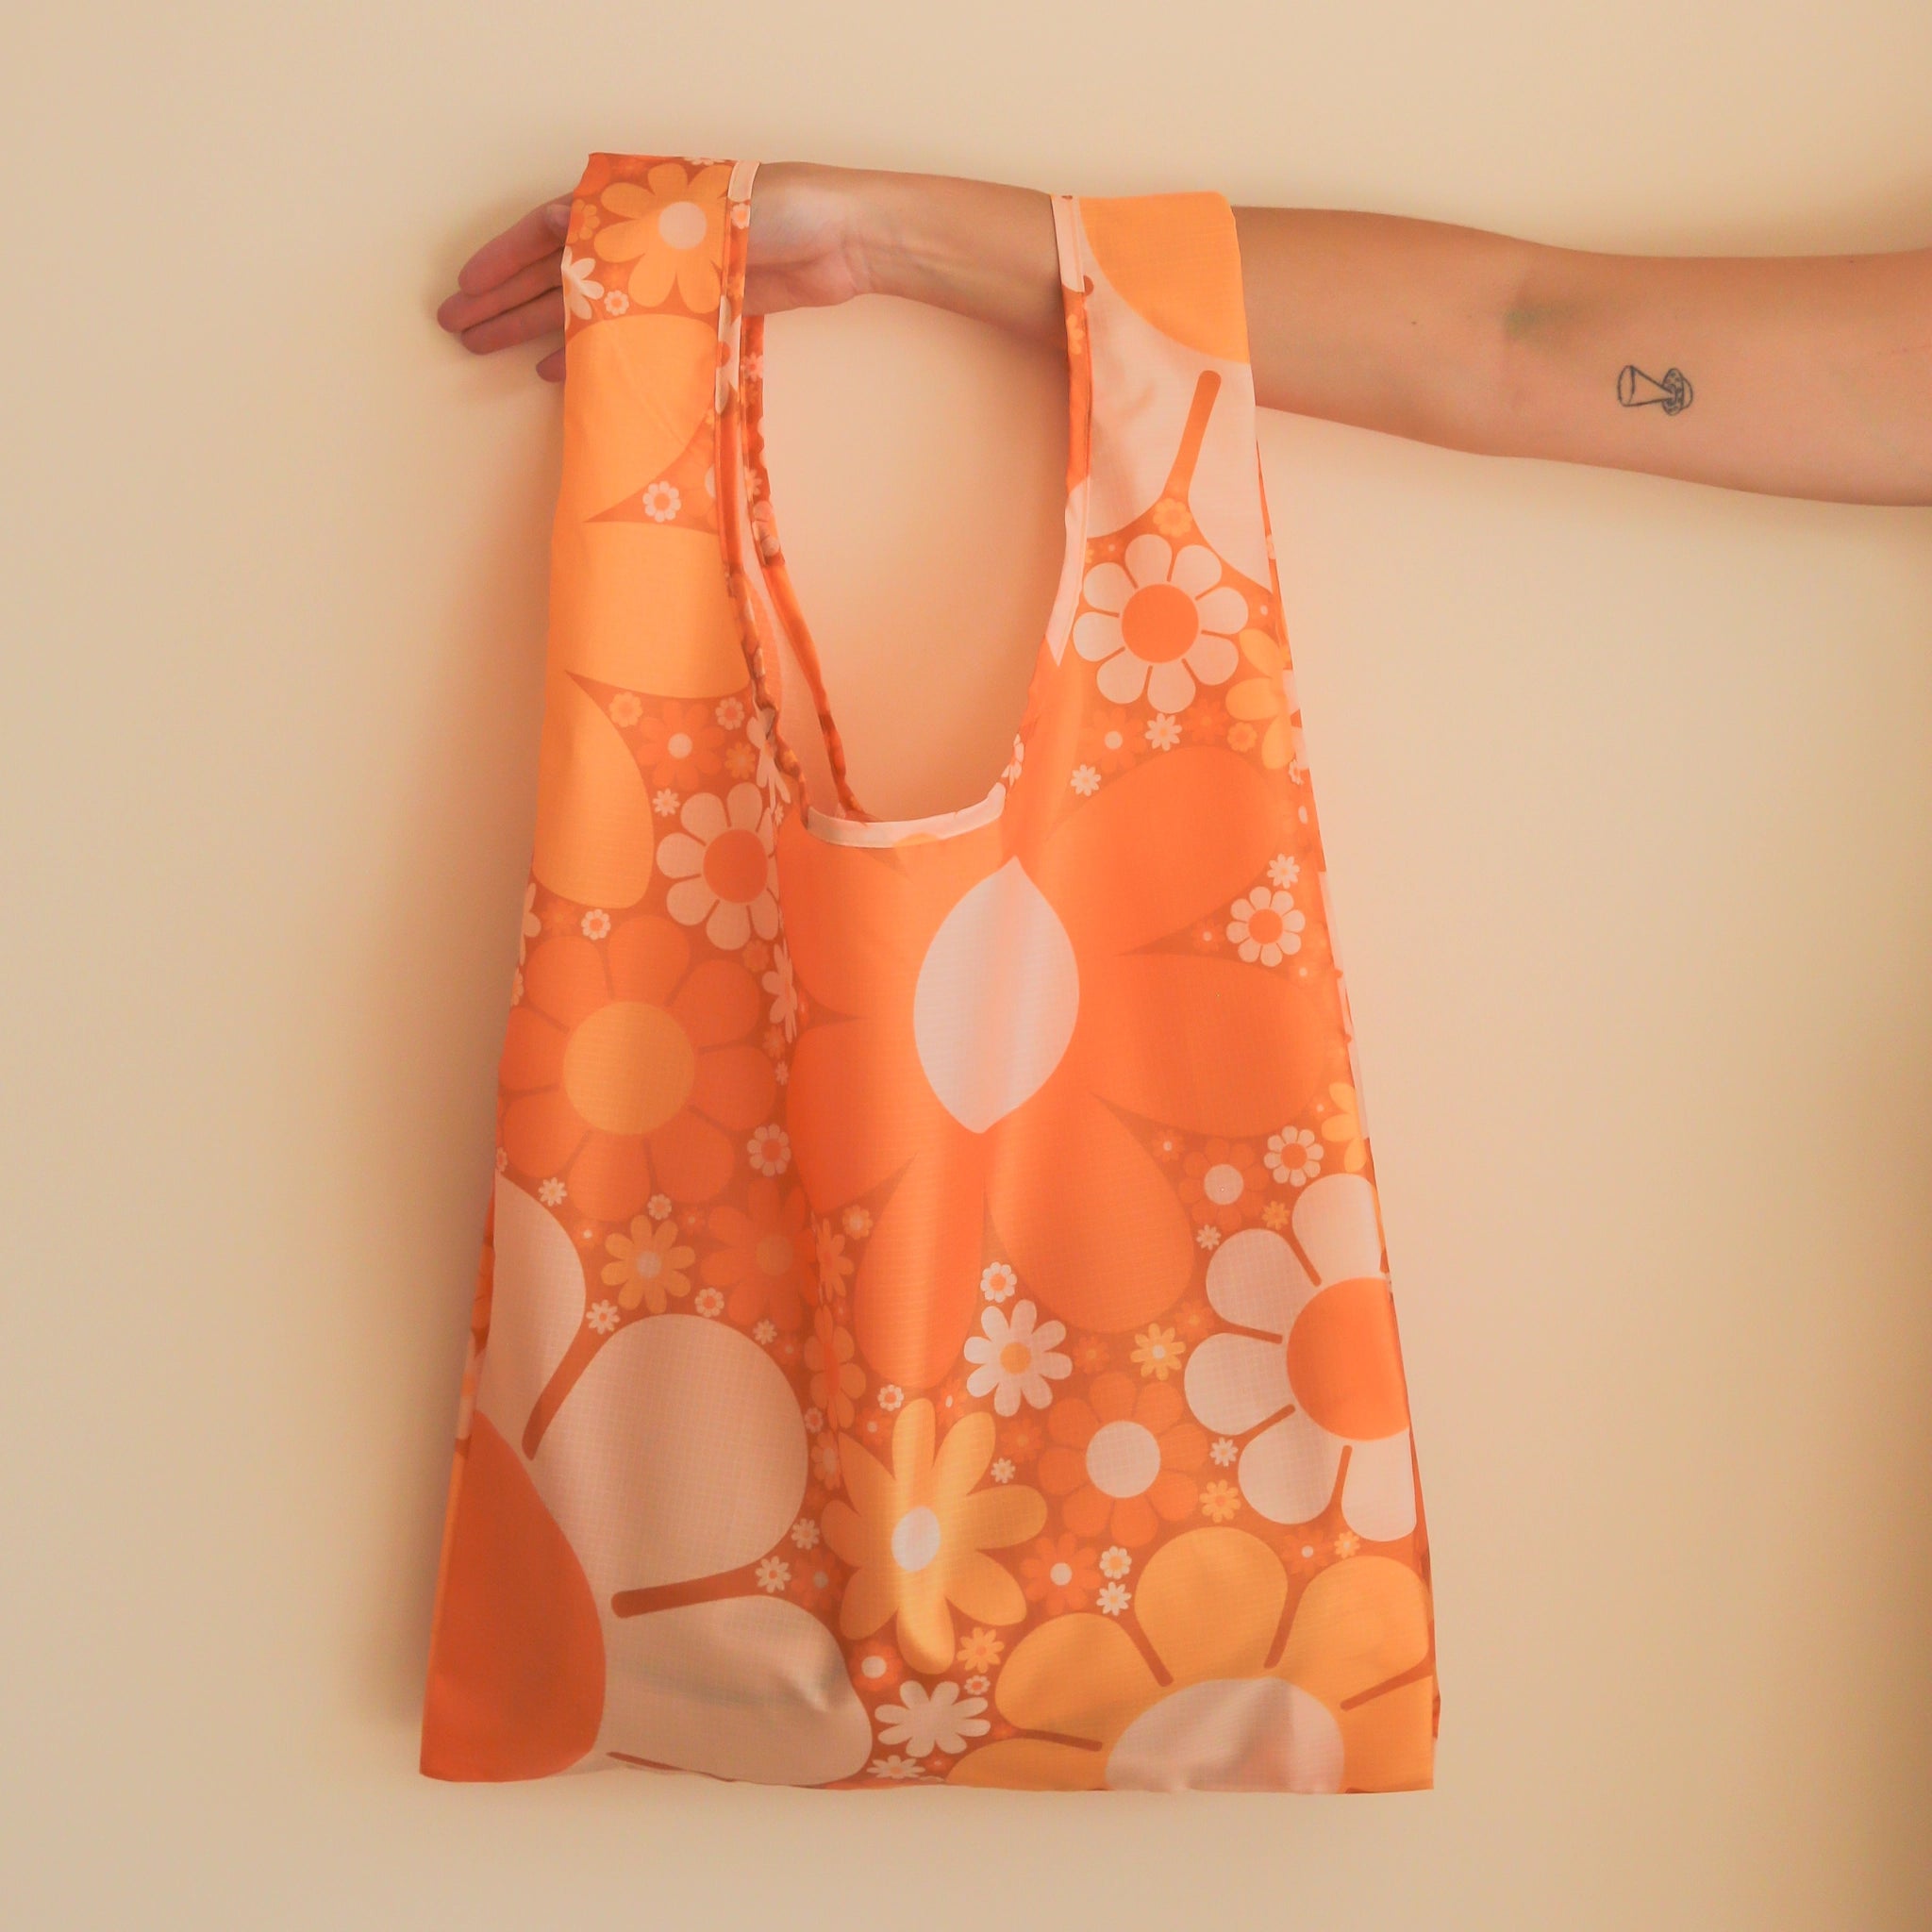 On a tan background is a model's arm holding a nylon reusable bag with an orange floral print. 